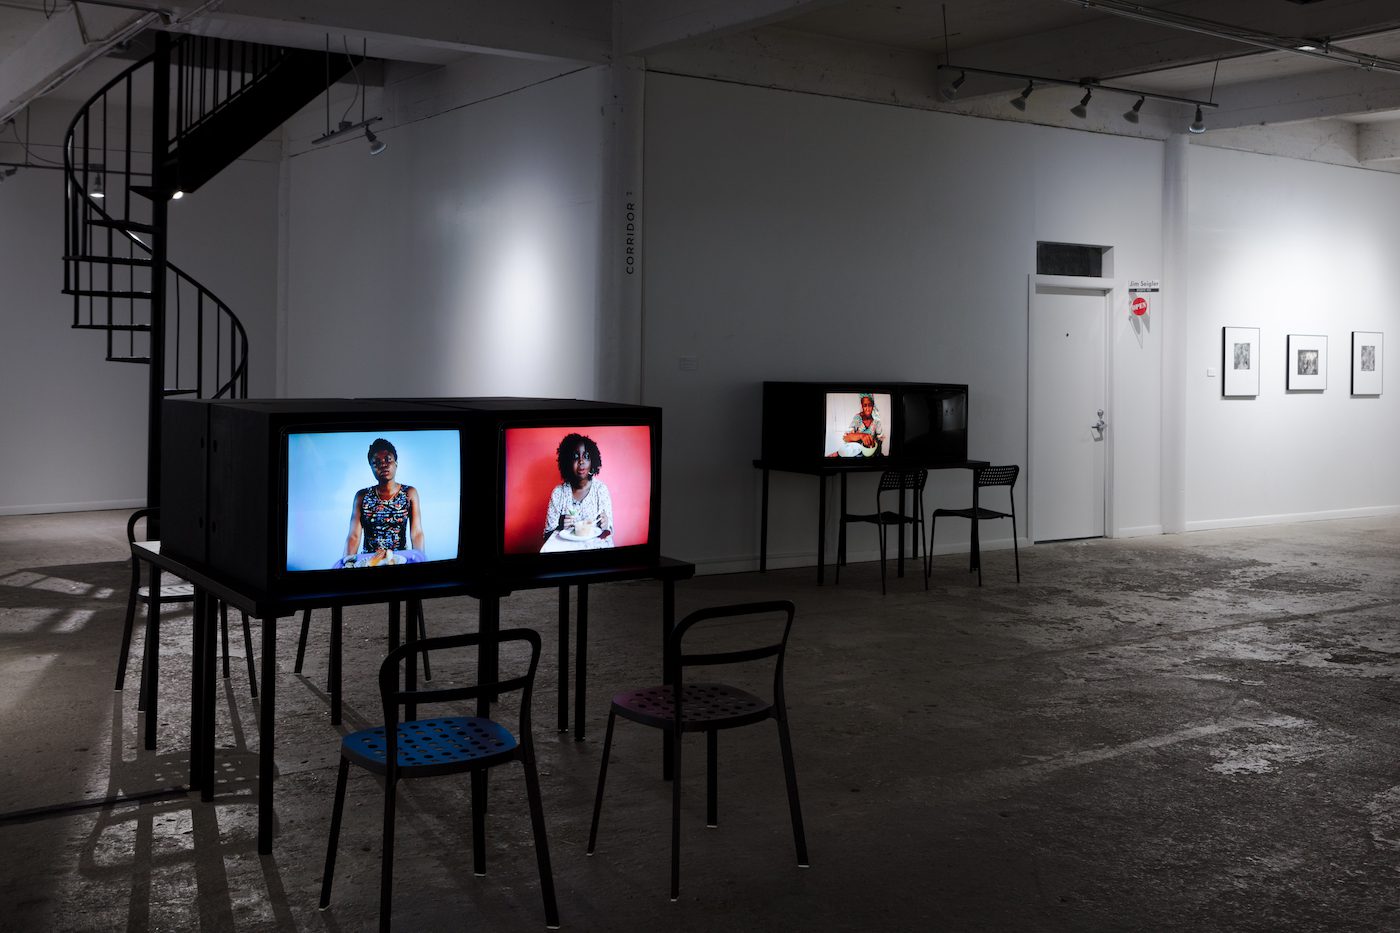 Installation view of Zina Saro Wiwa in the exhibition African Cosmologies: Photography, Time, and the Other at FotoFest Biennial 2020, Houston, TX. Photo: Emily Peacock. Courtesy of FotoFest, Houston, TX.